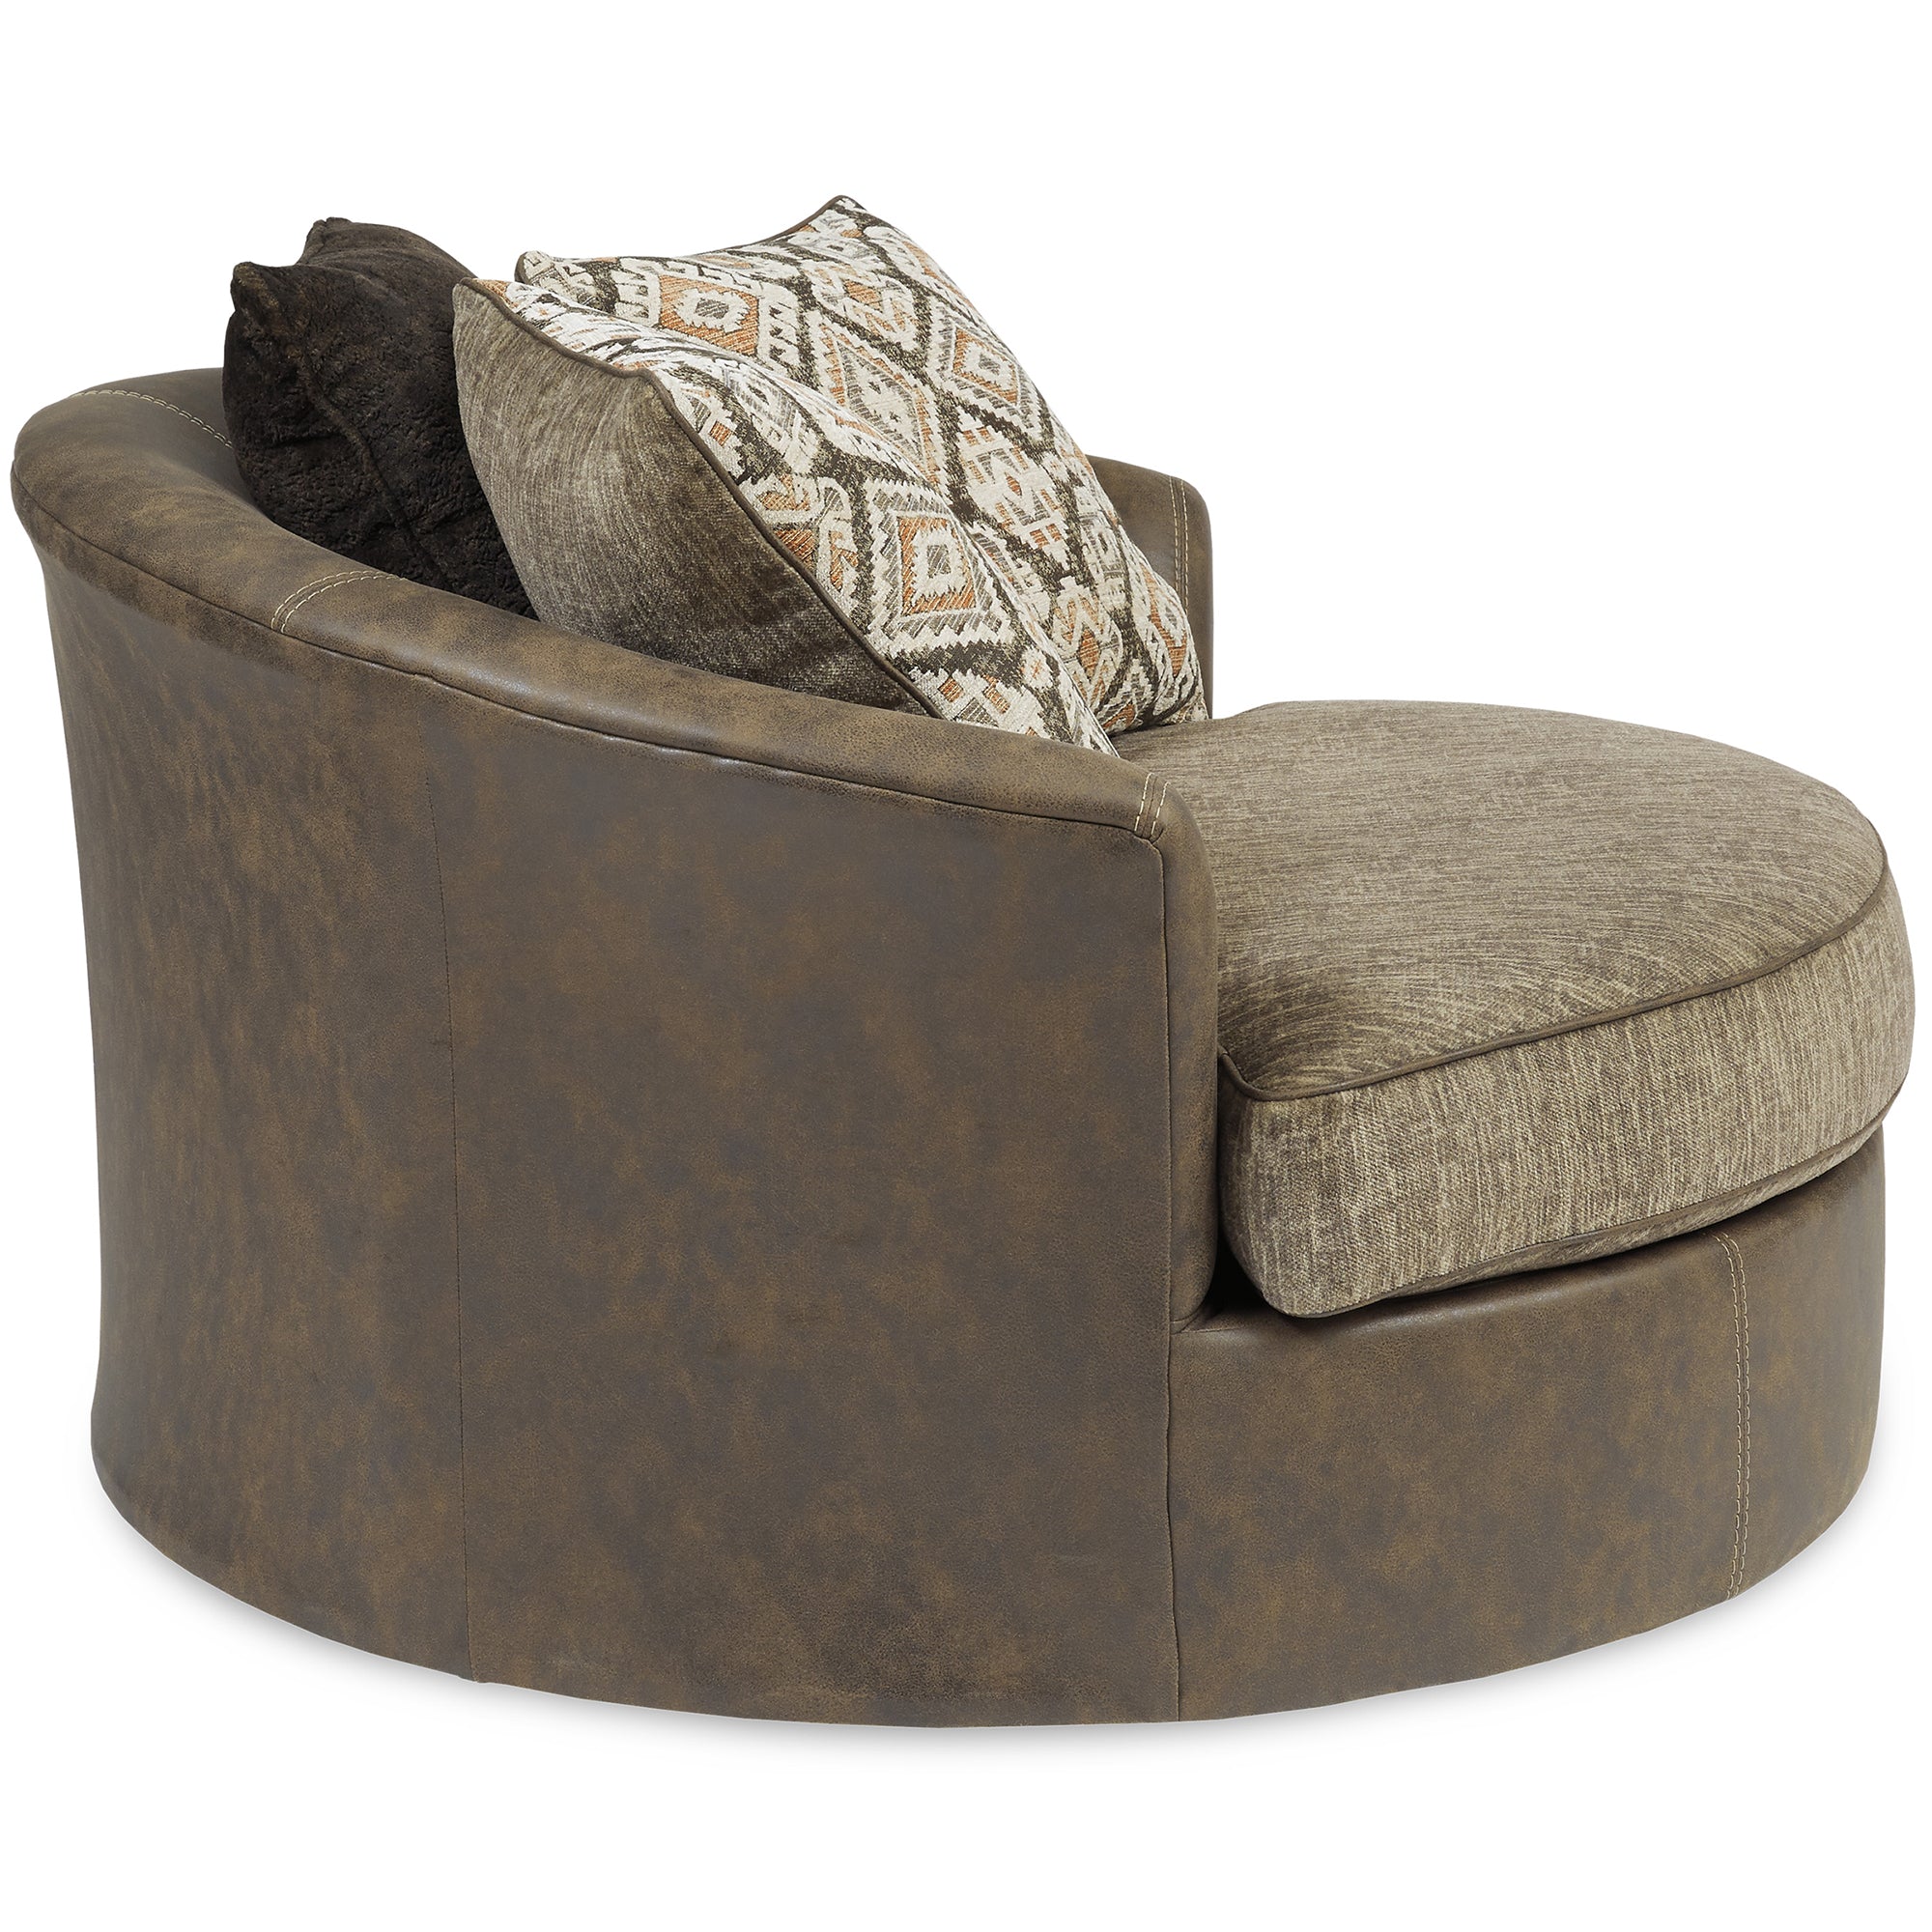 Abalone Oversized Swivel Accent Chair